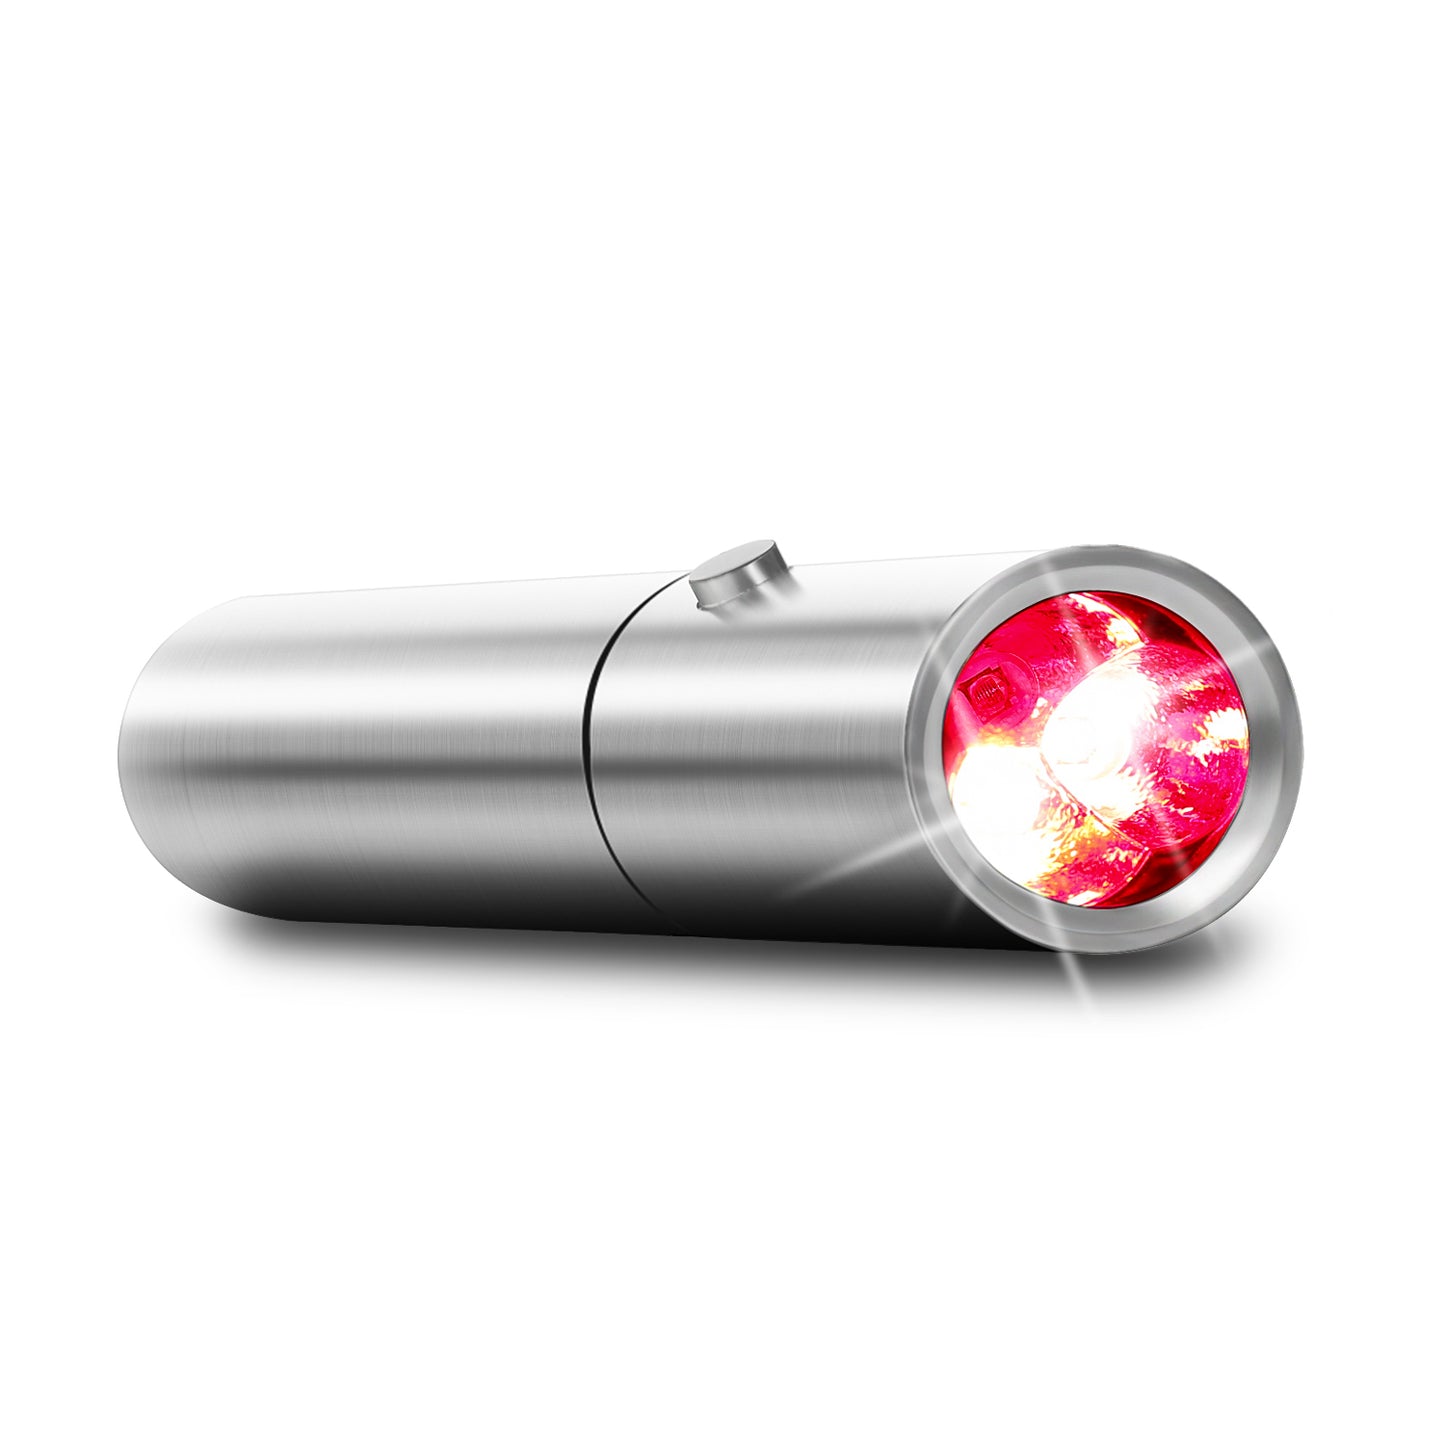 InzysJointRelief - Medical LED Infrared Light Therapy Device